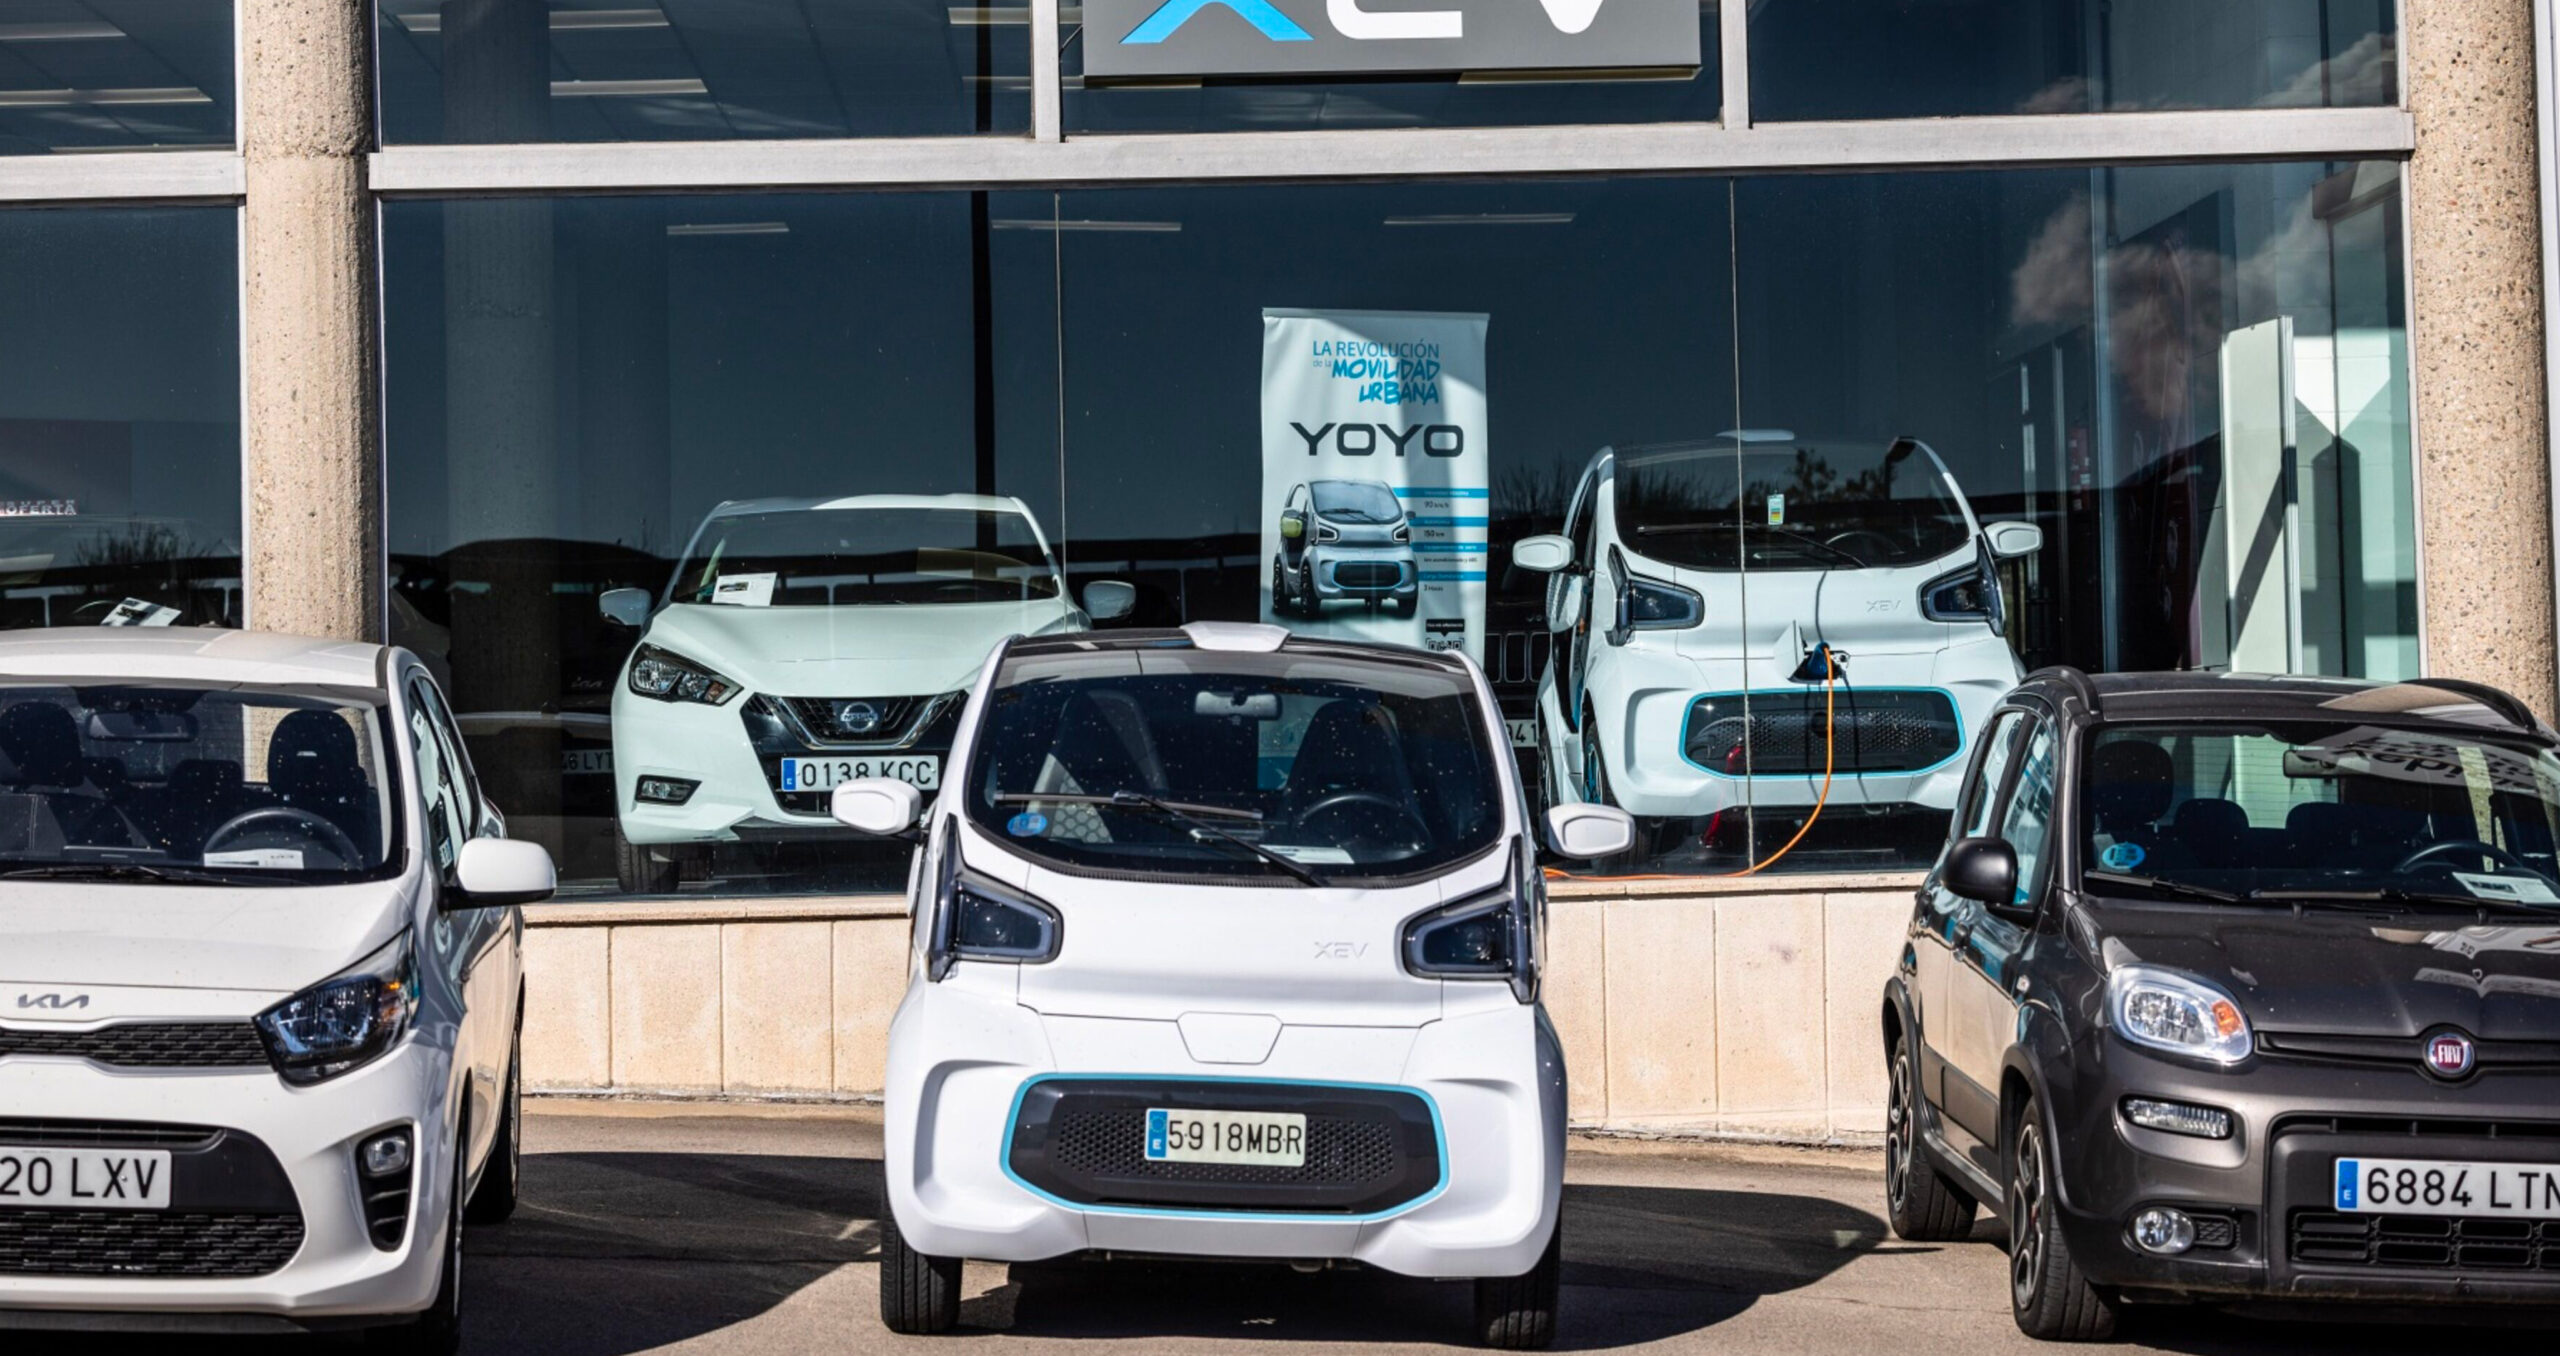 Experts agree Scope 4 or avoided emissions is a complex issue that needs standardisation and clarification. For example, even if over time EVs discourage the use and sale of fossil fuel cars, they could still stimulate the use of cars in general  (Photo: Angel Garcia/Bloomberg) 